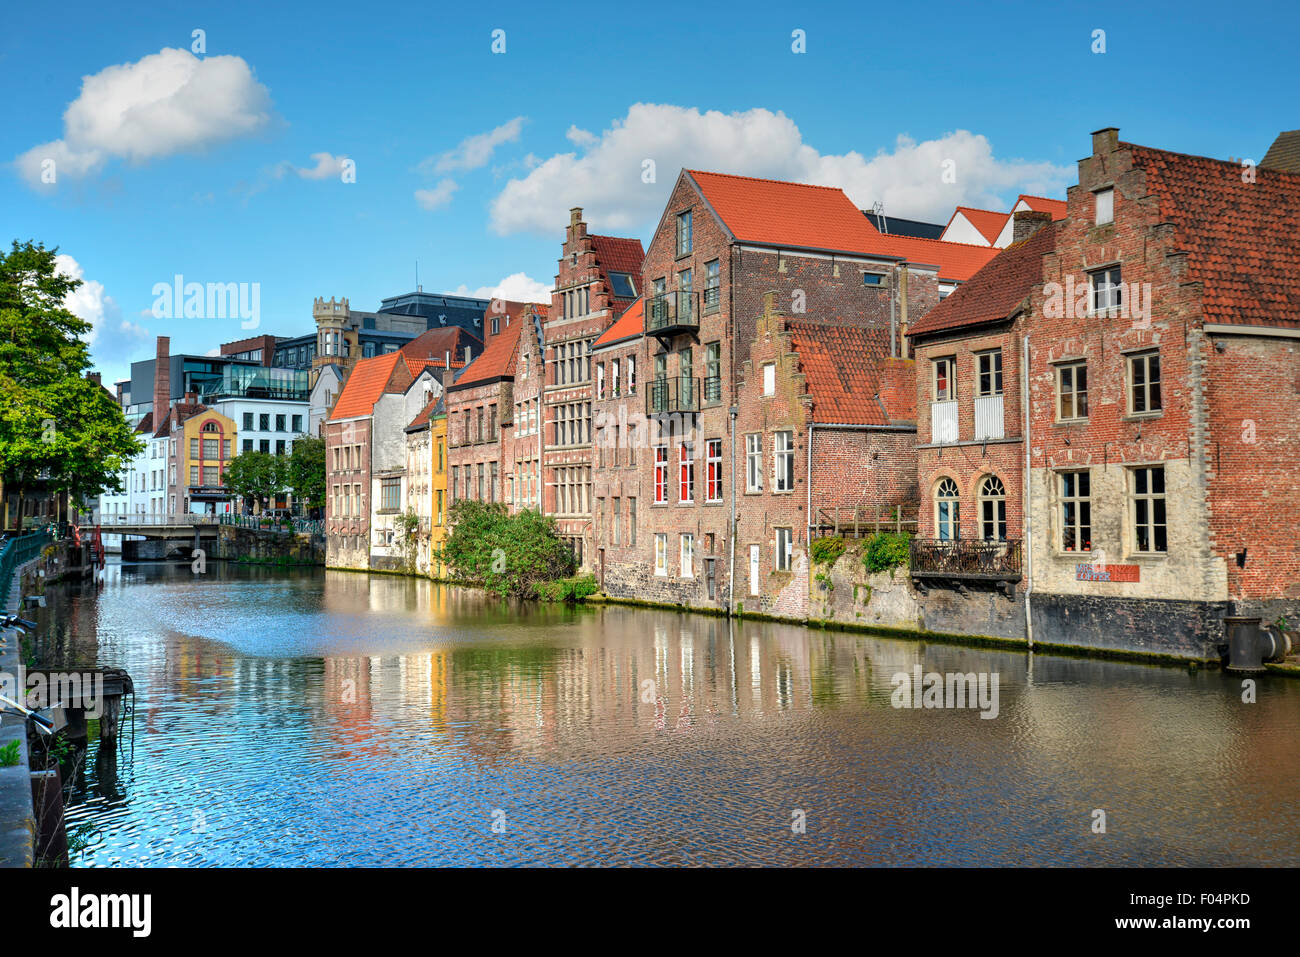 Beautiful view of ancient buildings with a blue sky and white clouds in Gent, Belgium Stock Photo